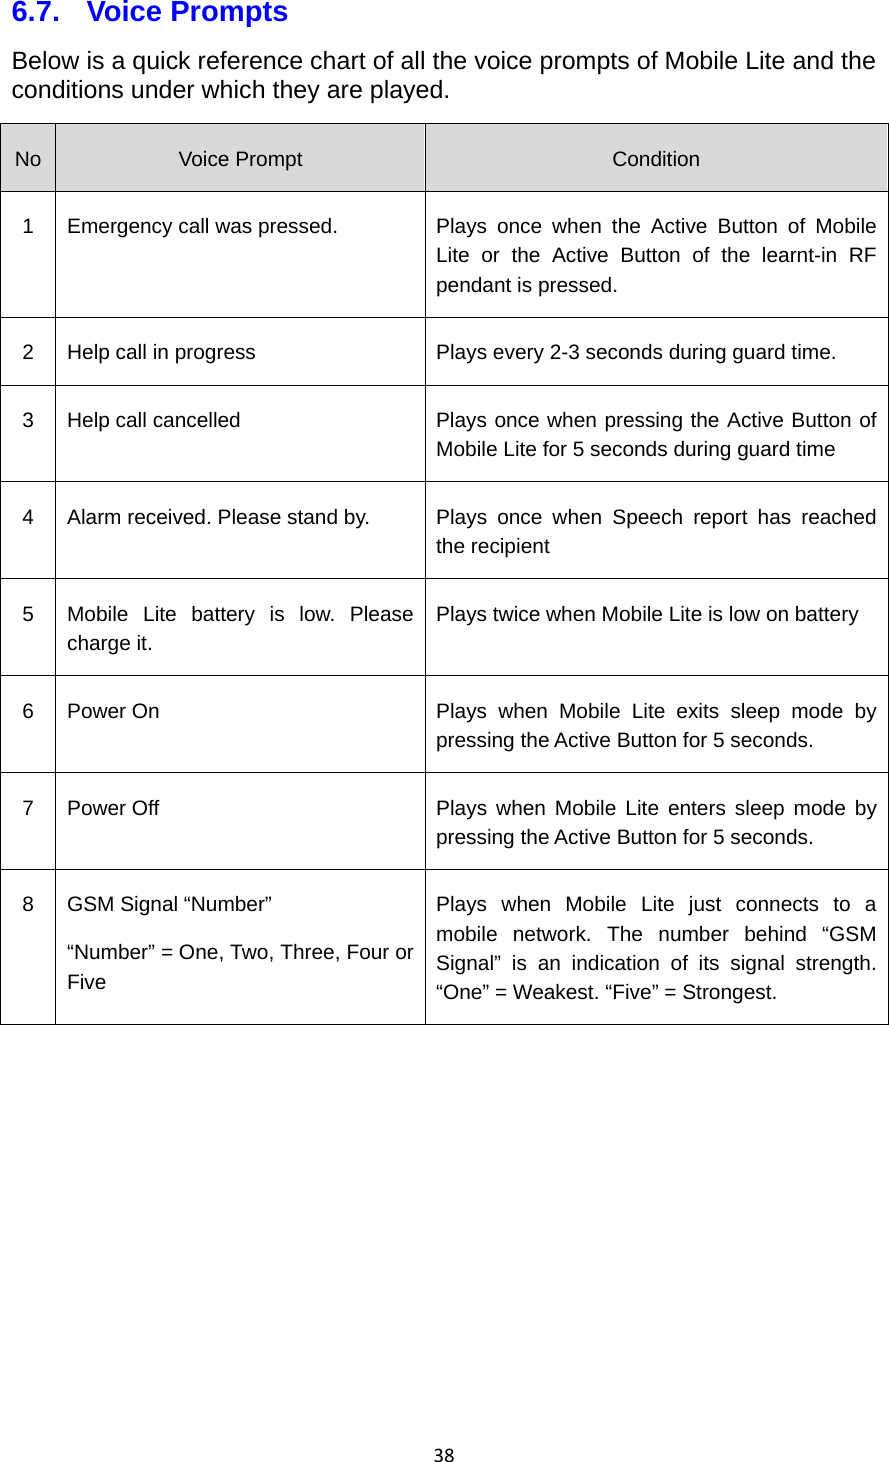 386.7. Voice Prompts Below is a quick reference chart of all the voice prompts of Mobile Lite and the conditions under which they are played. No  Voice Prompt  Condition 1  Emergency call was pressed.  Plays once when the Active Button of Mobile Lite or the Active Button of the learnt-in RF pendant is pressed. 2  Help call in progress  Plays every 2-3 seconds during guard time. 3  Help call cancelled  Plays once when pressing the Active Button of Mobile Lite for 5 seconds during guard time 4  Alarm received. Please stand by.  Plays  once  when  Speech  report  has  reached the recipient 5  Mobile Lite battery is low. Please charge it. Plays twice when Mobile Lite is low on battery 6  Power On  Plays when Mobile Lite exits sleep mode by pressing the Active Button for 5 seconds. 7  Power Off  Plays when Mobile Lite enters sleep mode by pressing the Active Button for 5 seconds. 8  GSM Signal “Number” “Number” = One, Two, Three, Four or Five Plays when Mobile Lite just connects to a mobile network. The number behind “GSM Signal” is an indication of its signal strength. “One” = Weakest. “Five” = Strongest.   